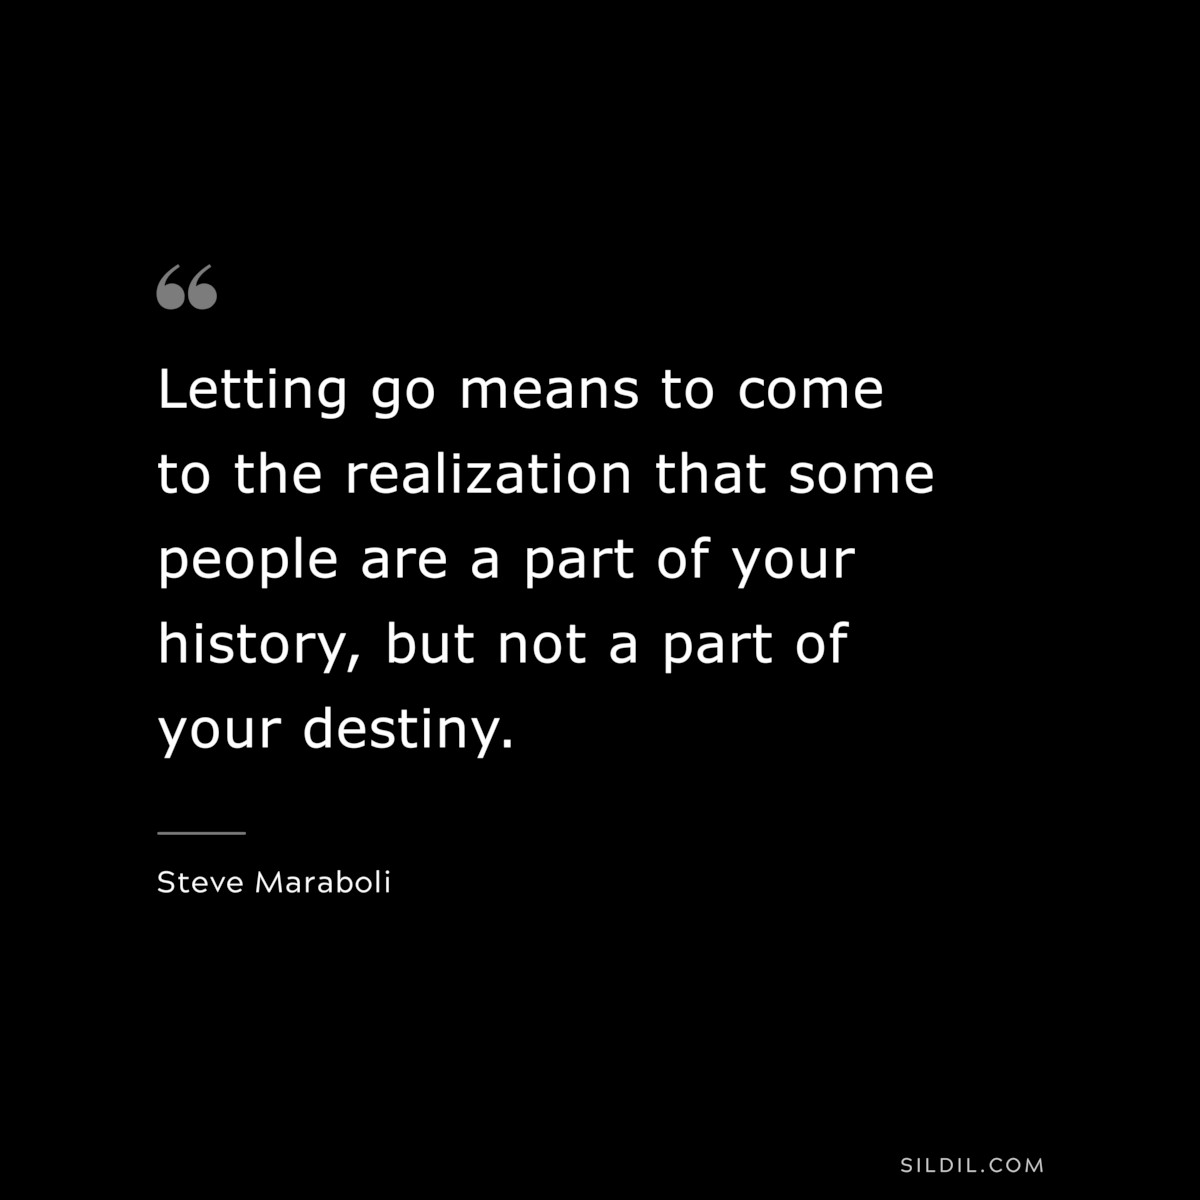 Letting go means to come to the realization that some people are a part of your history, but not a part of your destiny. ― Steve Maraboli